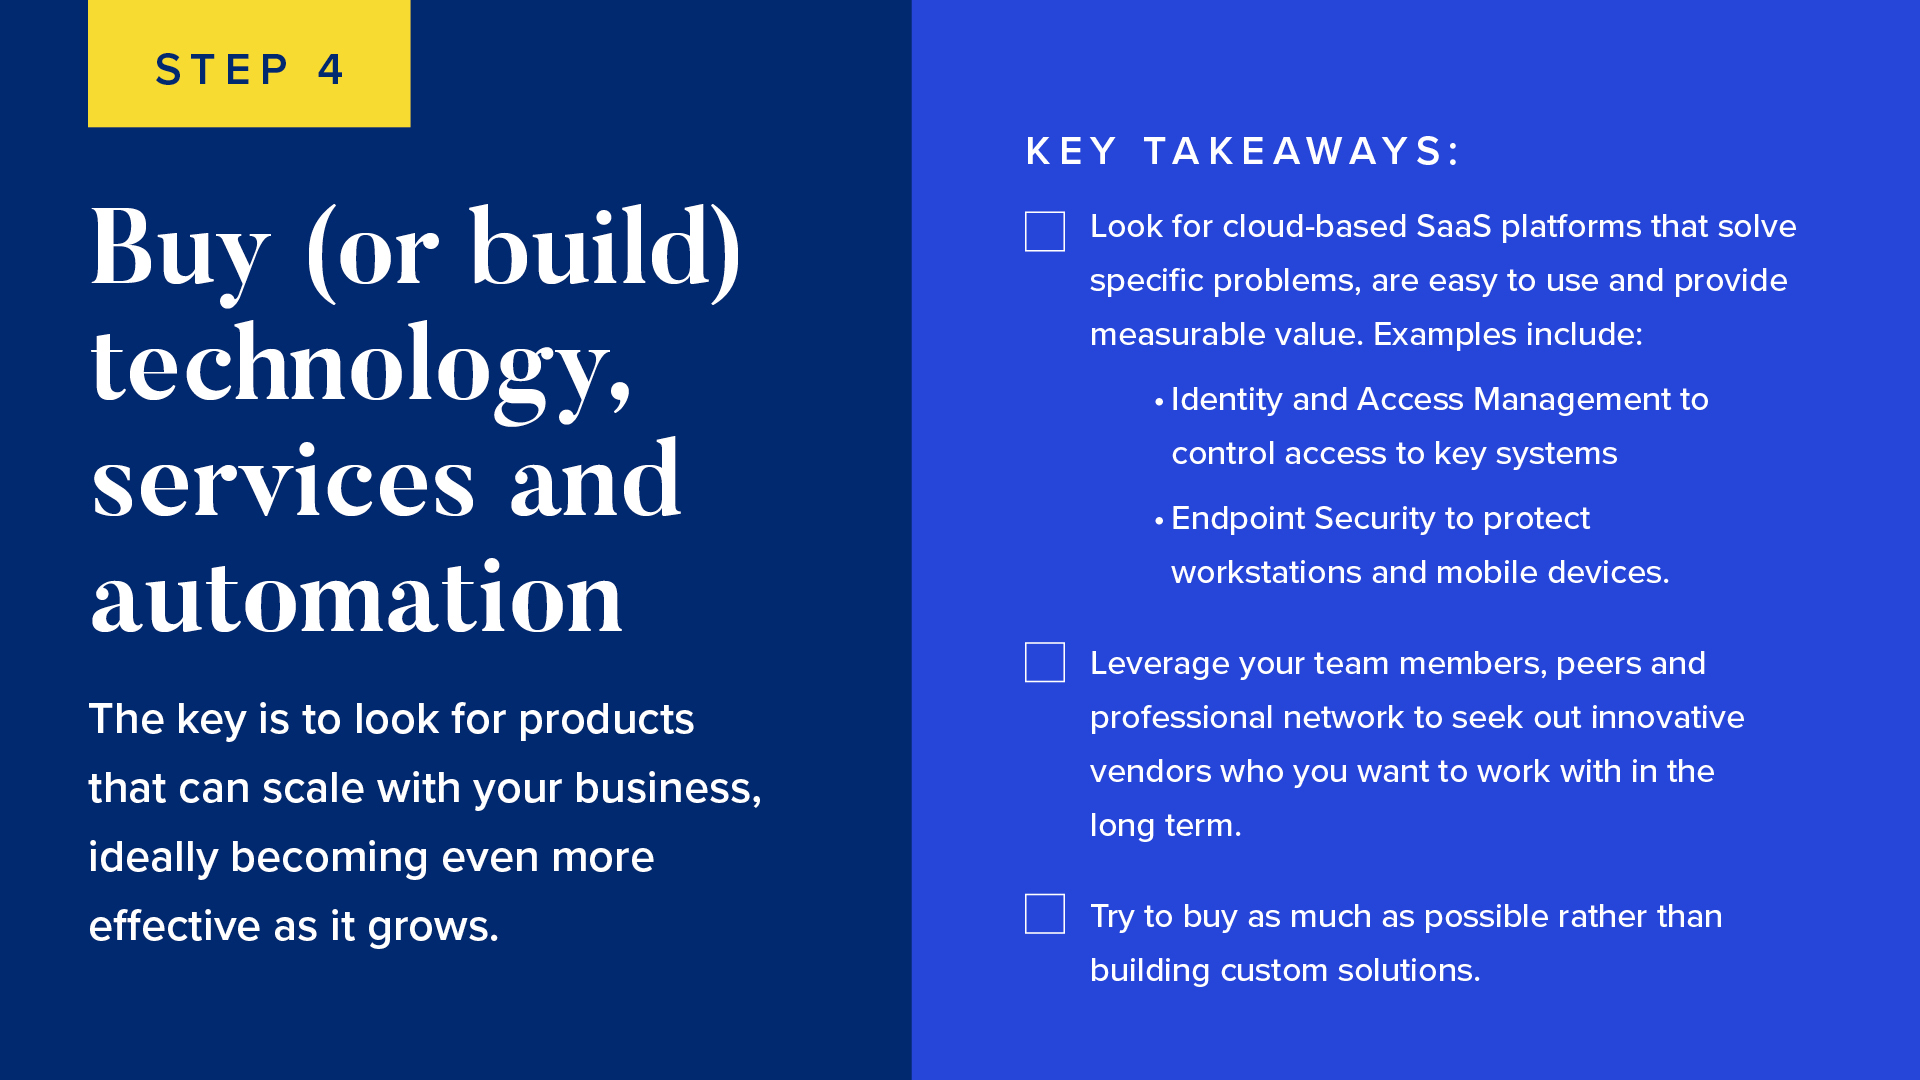 INFOGRAPHIC #4: Buy (or build) technology, services and automation 

The key is to look for products that can scale with your business, ideally becoming even more effective as it grows. 


Look for cloud-based SaaS platforms that solve specific problems, are easy to use and provide measurable value. Examples include: 
Identity and Access Management to control access to key systems
Endpoint Security to protect workstations and mobile devices
Leverage your team members, peers and professional network to seek out innovative vendors who you want to work with in the long term.
Try to buy as much as possible rather than building custom solutions. 
